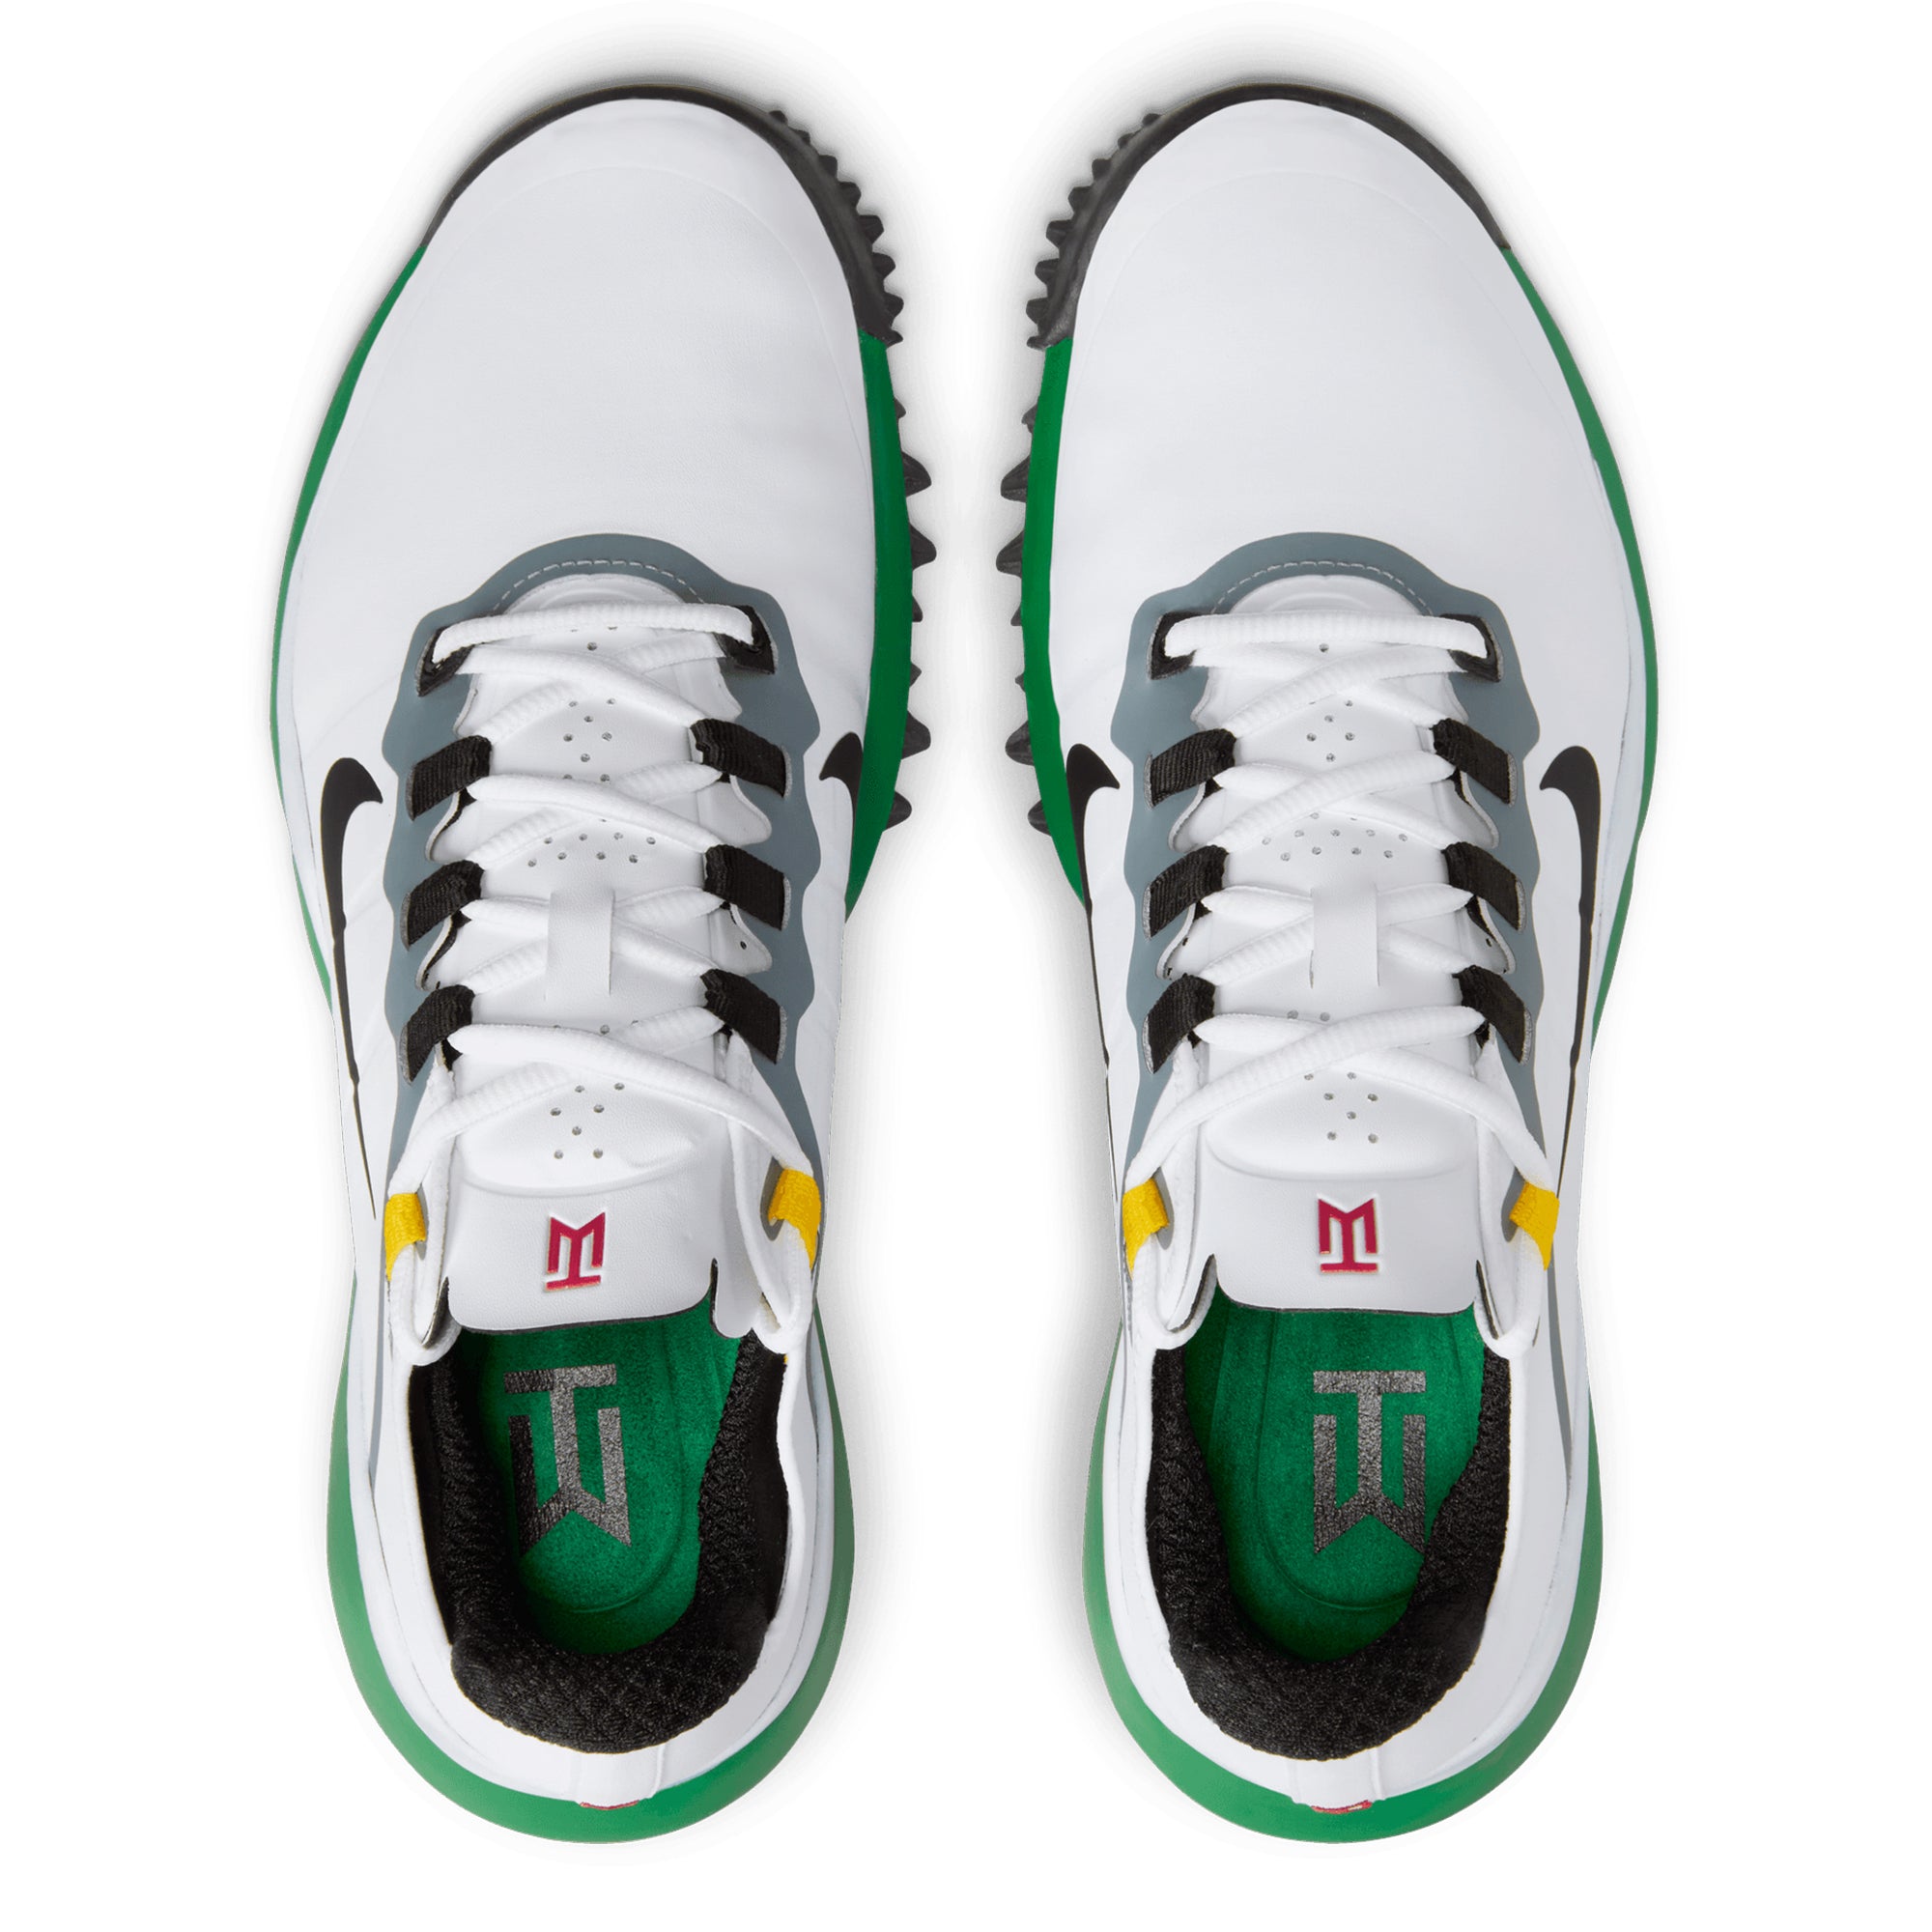 nike-golf-tw-13-shoes